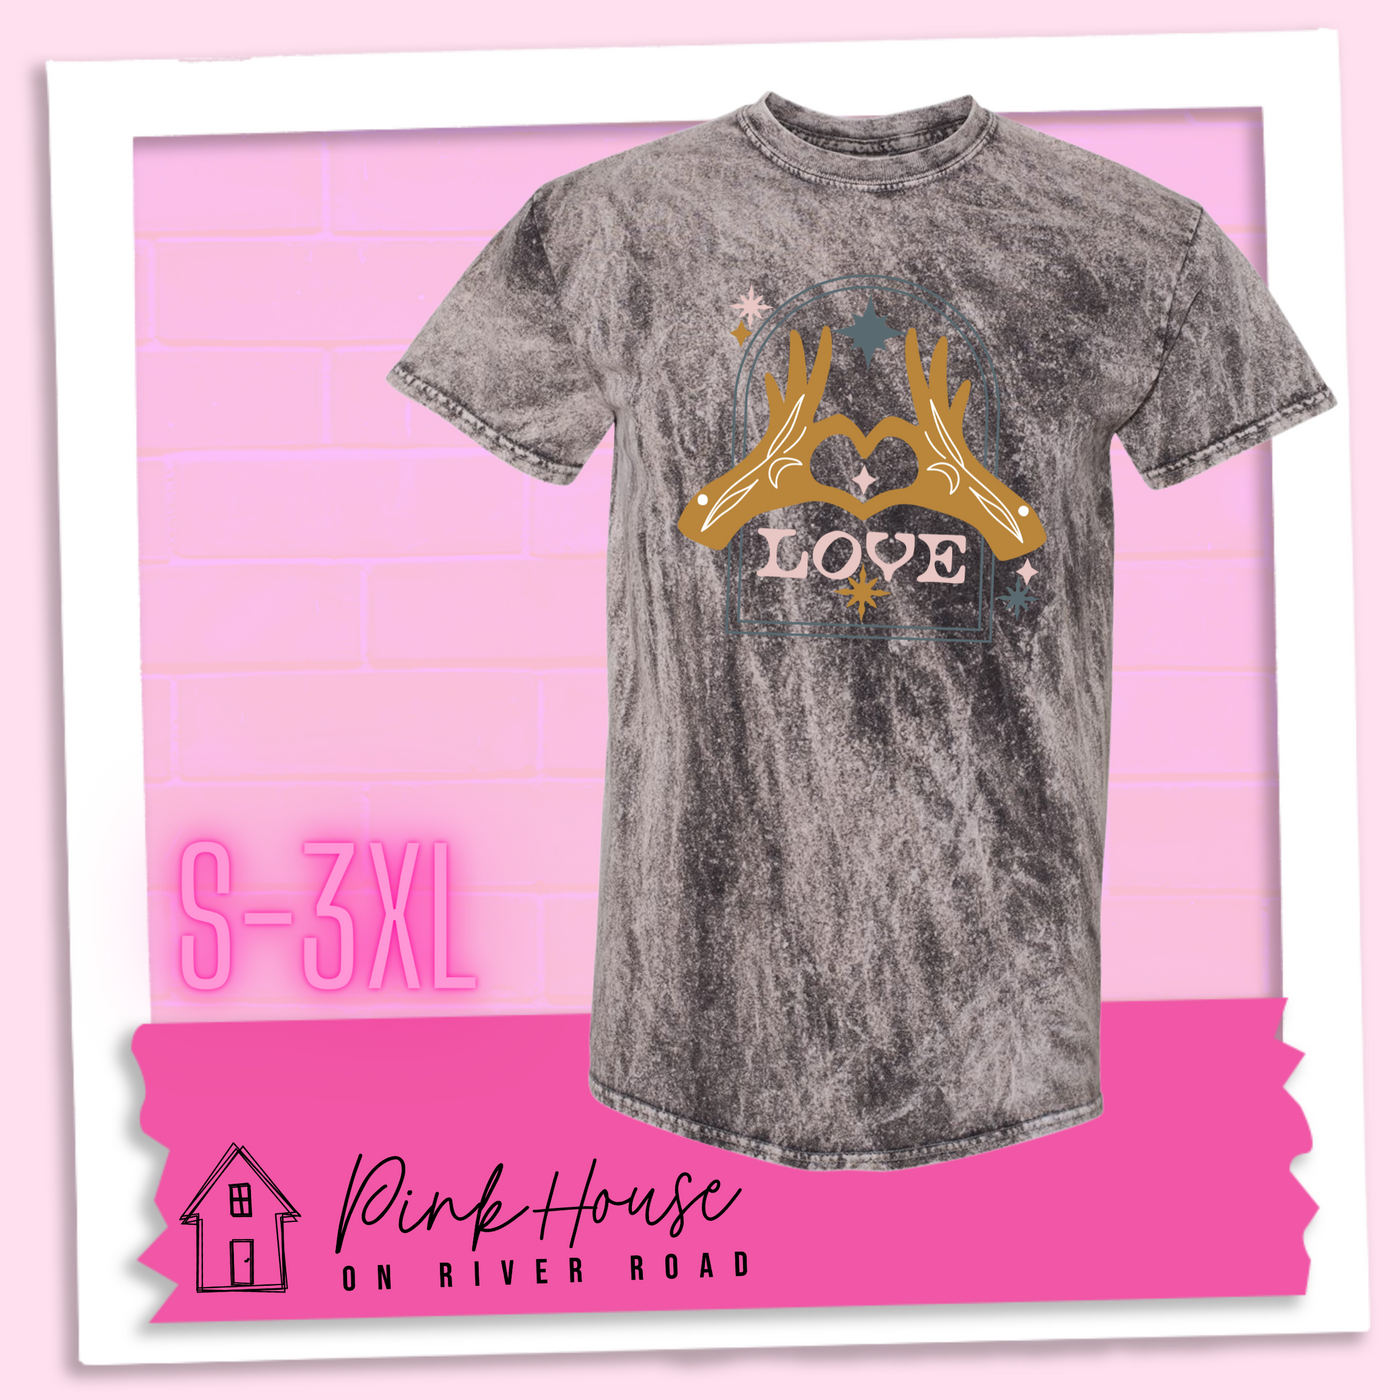 Charcoal Mineral Wash tee with a graphic. Graphic is of two tattooed hands making a heart in front of an archway with stars and the word Love in the archway.